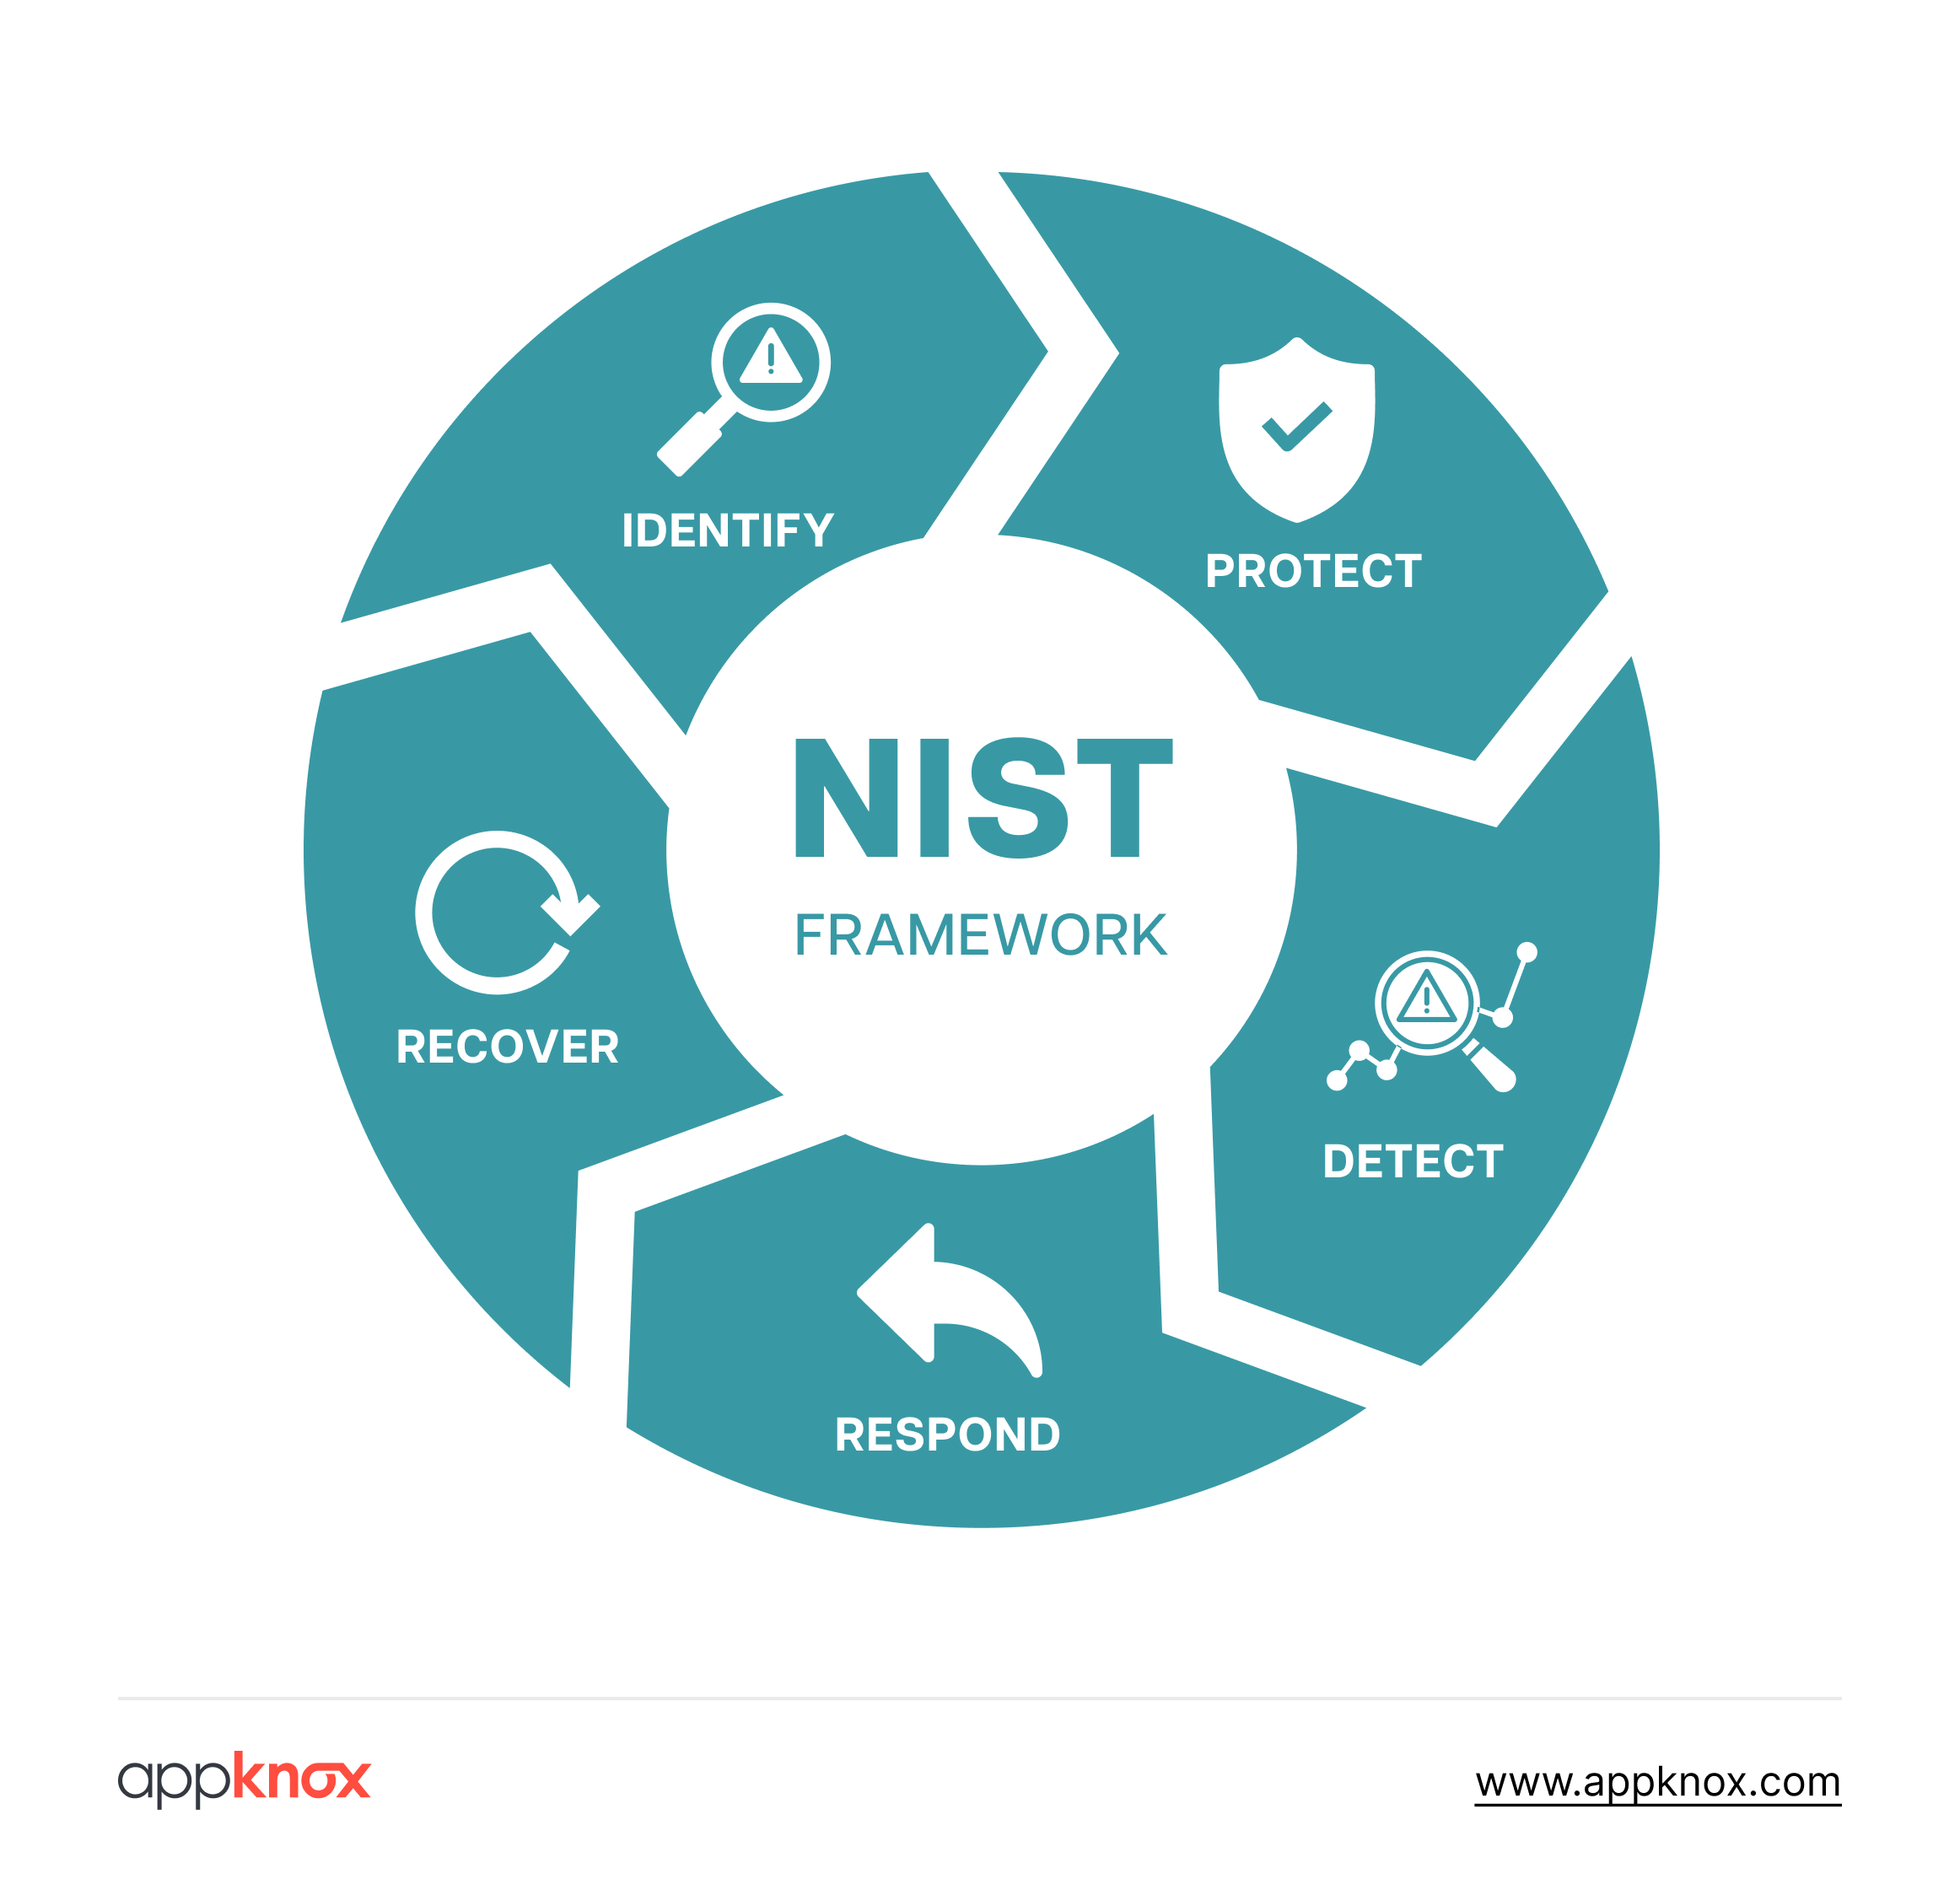 What is the NIST compliance framework? - Mobile apps security